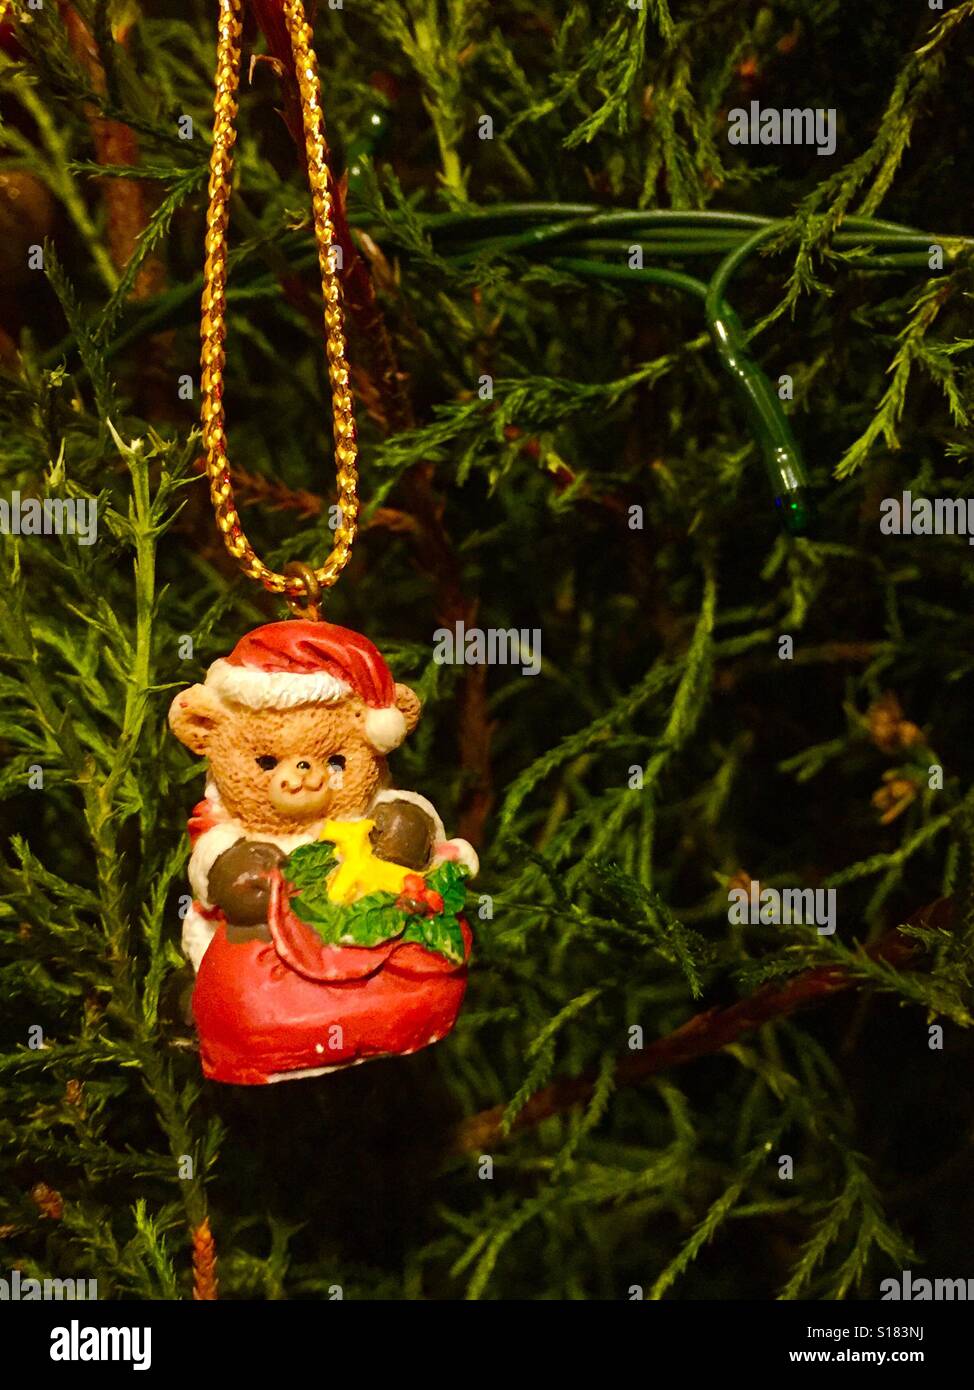 Christmas Ornament of a Santa dressed bear hanging from tree Stock Photo